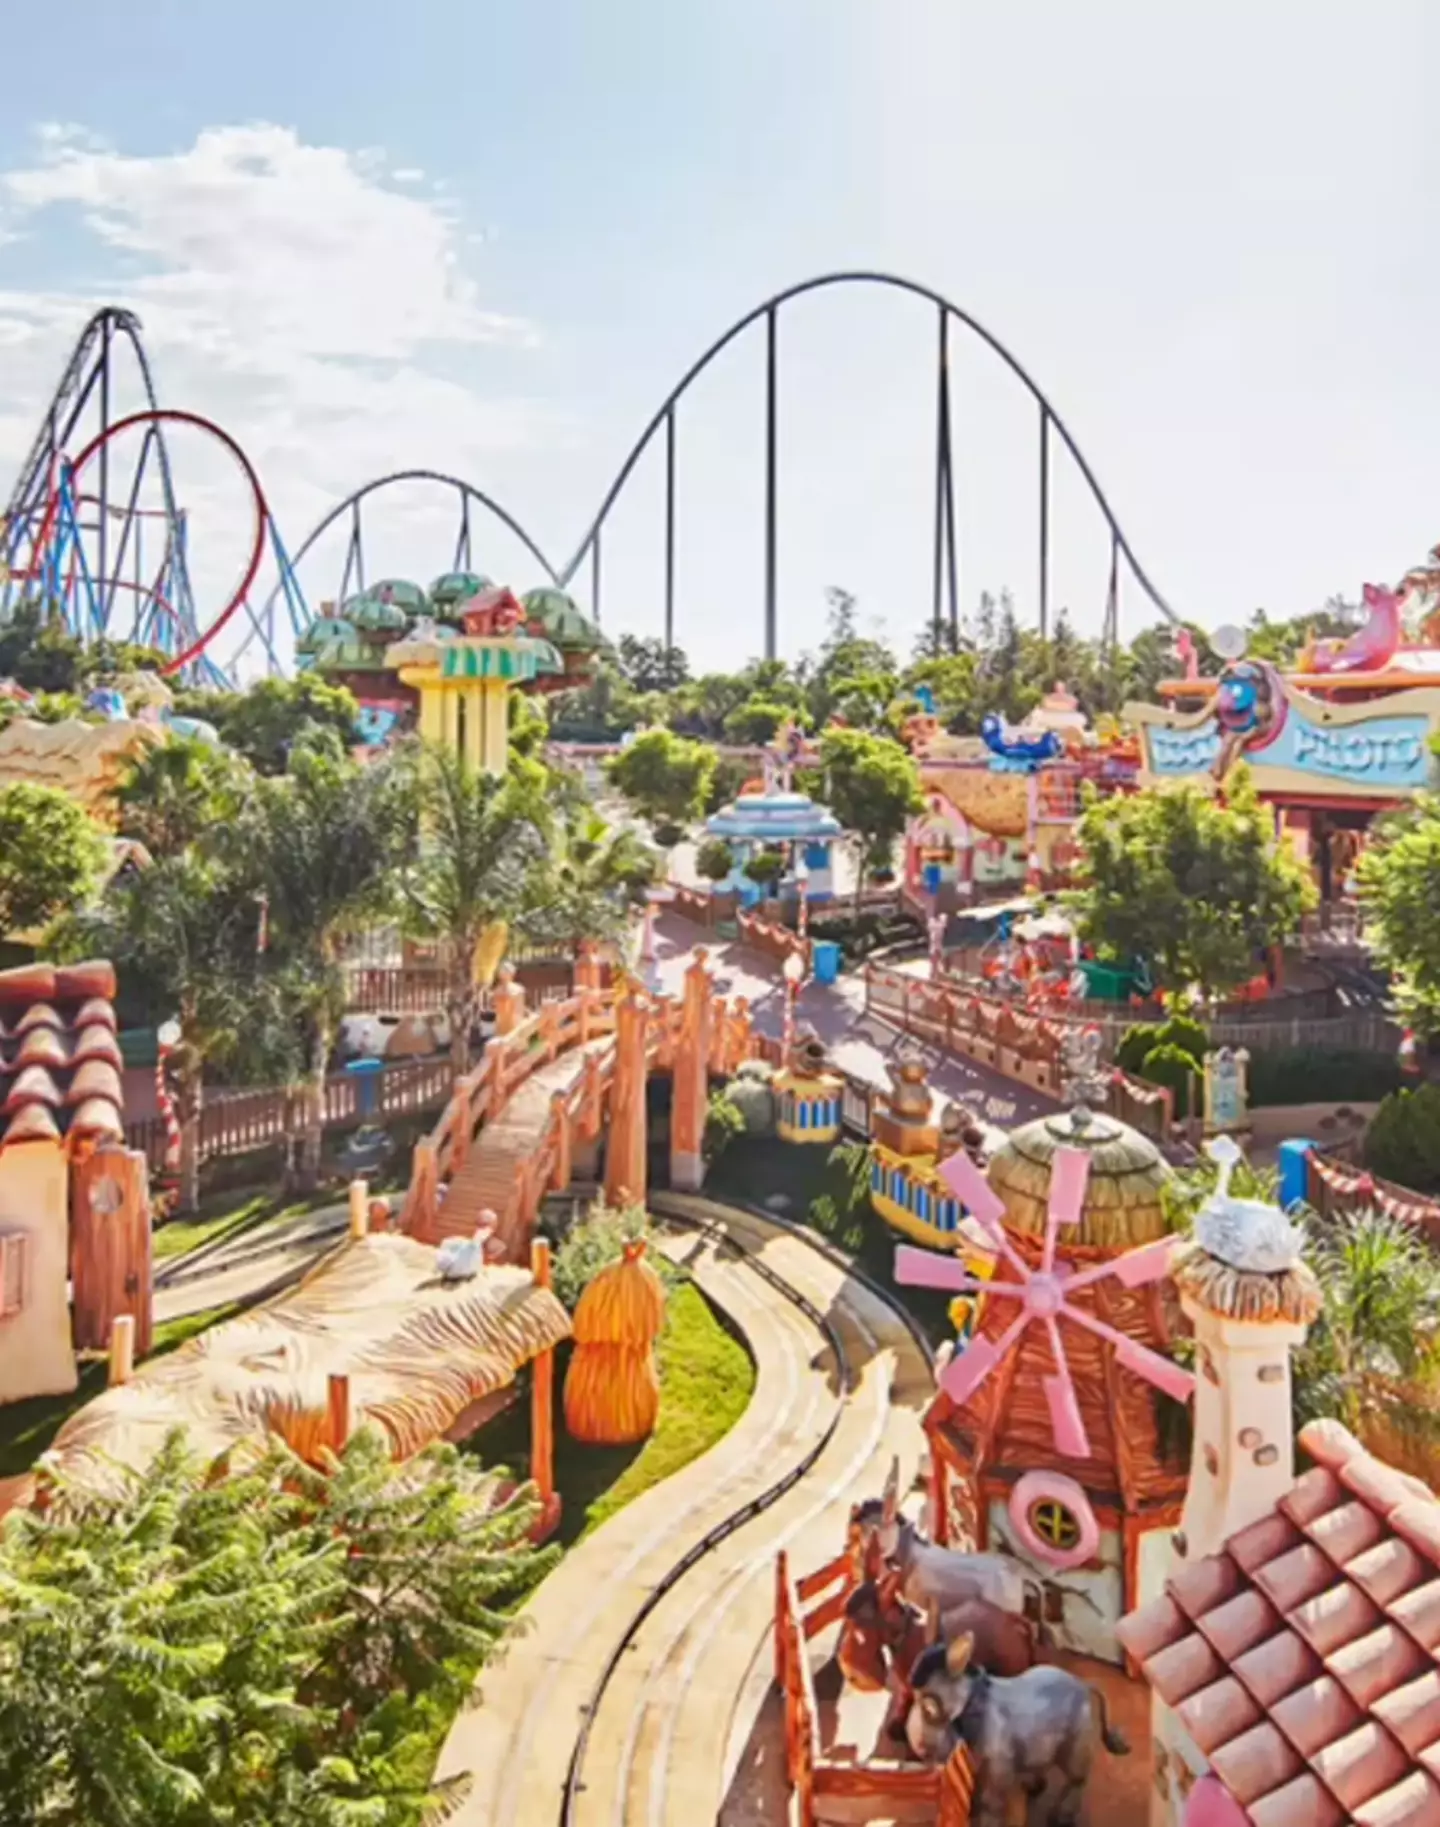 Many think the theme park is 'better than Disneyland'.